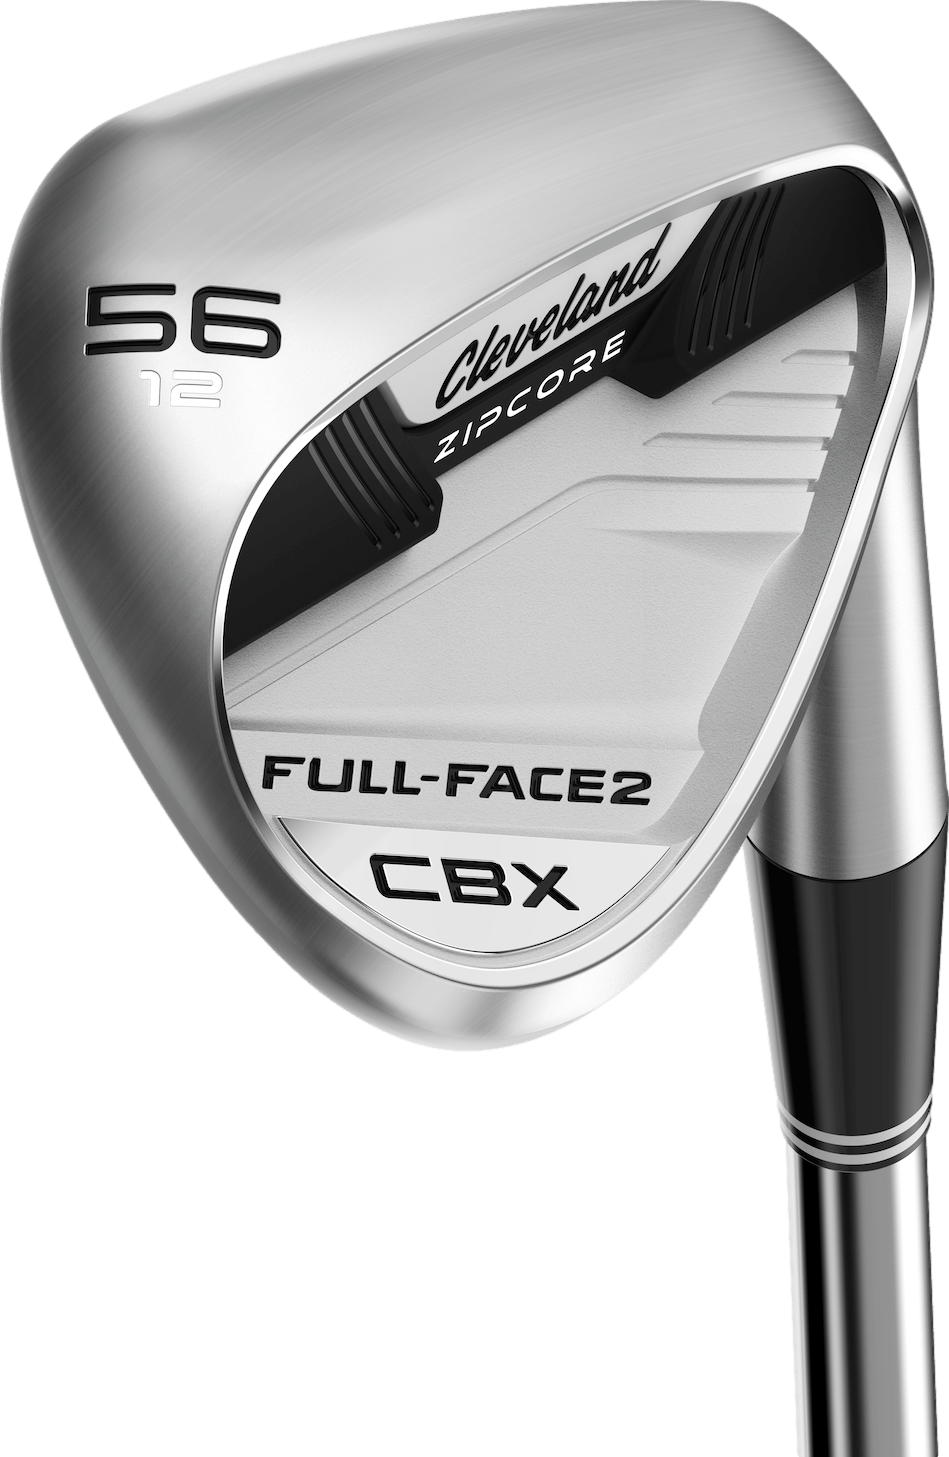 Cleveland CBX Full Face 2 Tour Satin Wedge | Curated.com